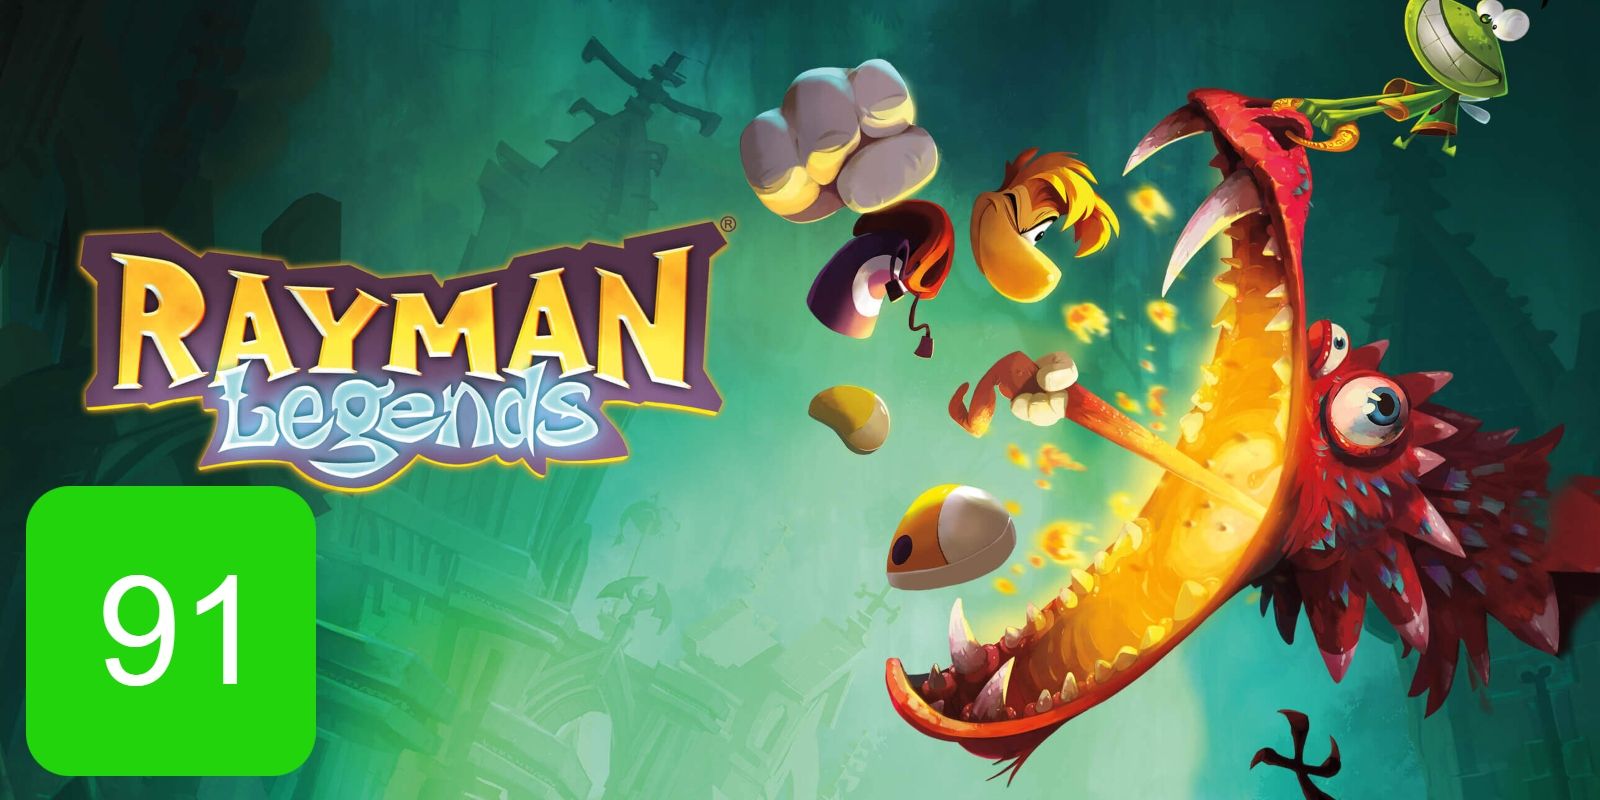 The Xbox One Metascore for Rayman Legends, featuring the cover from the game.